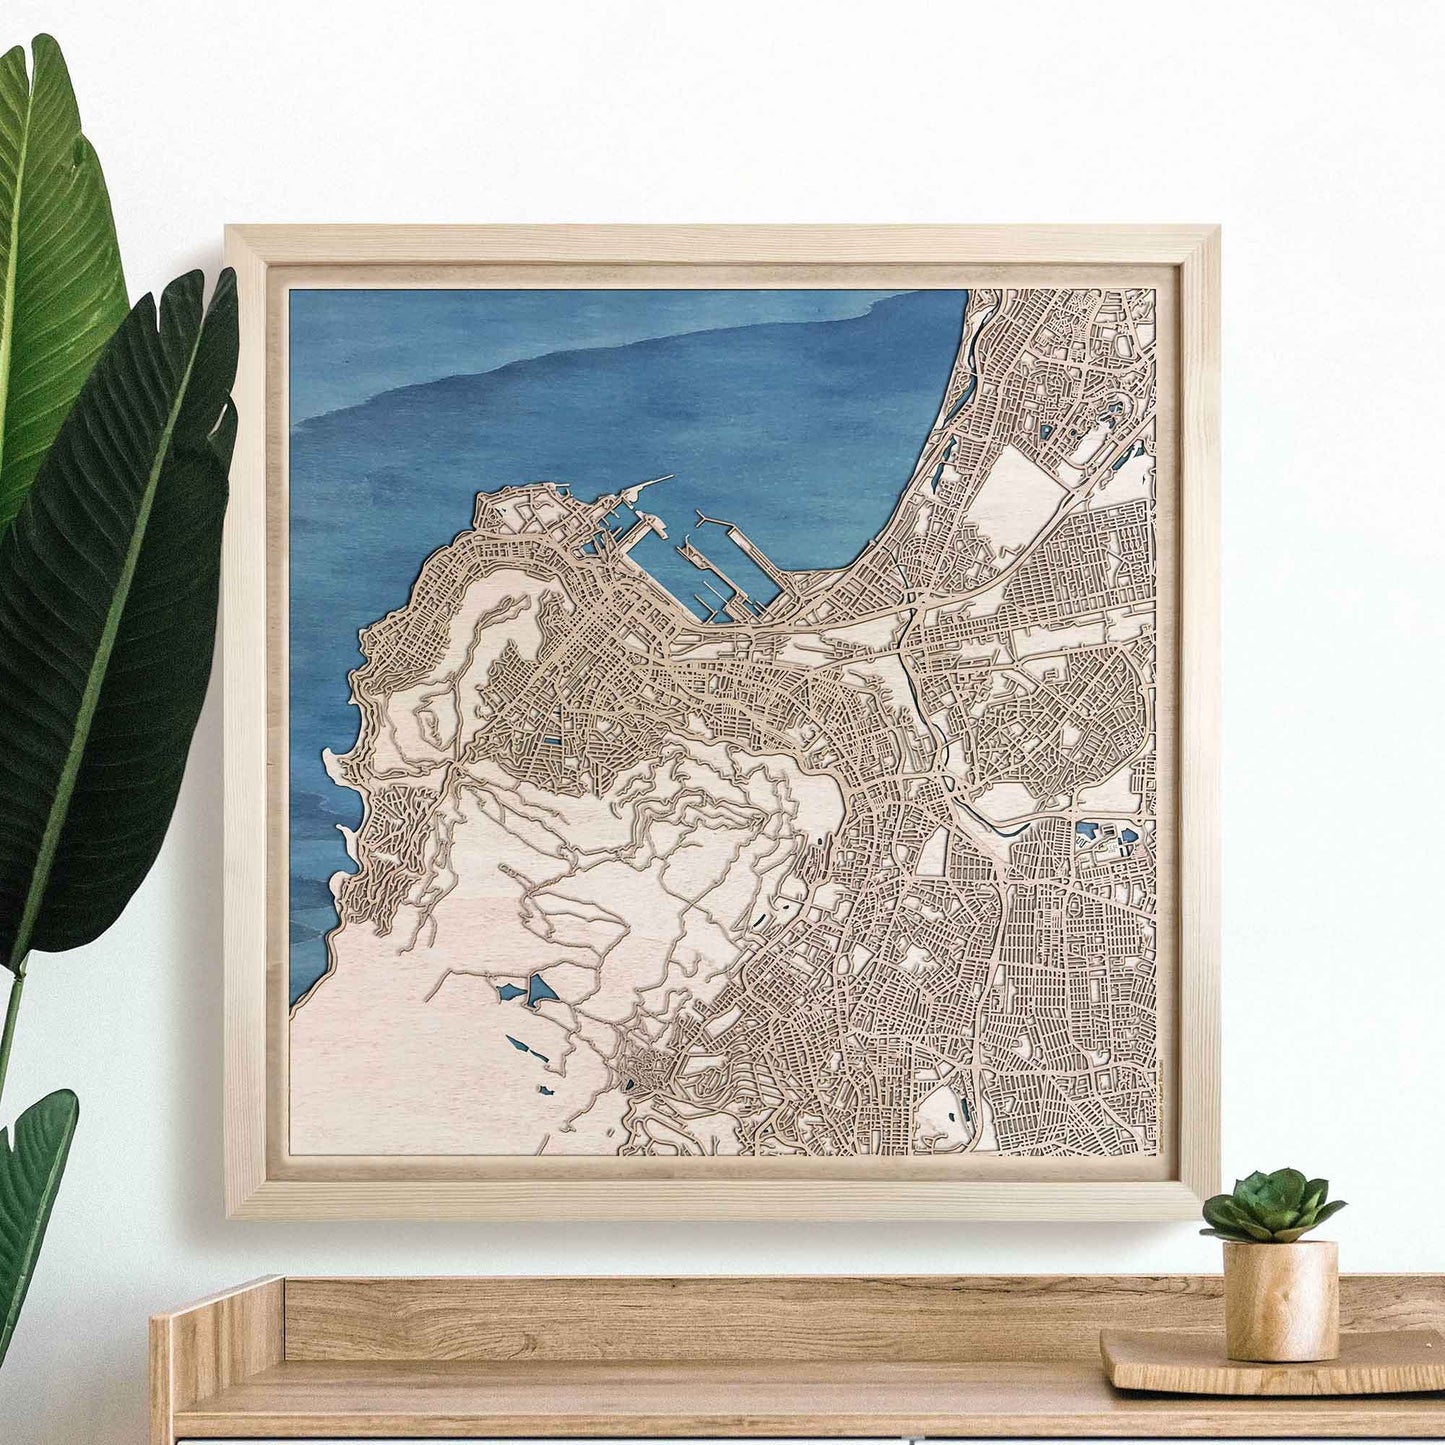 Cape Town Wooden Map by CityWood - Custom Wood Map Art - Unique Laser Cut Engraved - Anniversary Gift